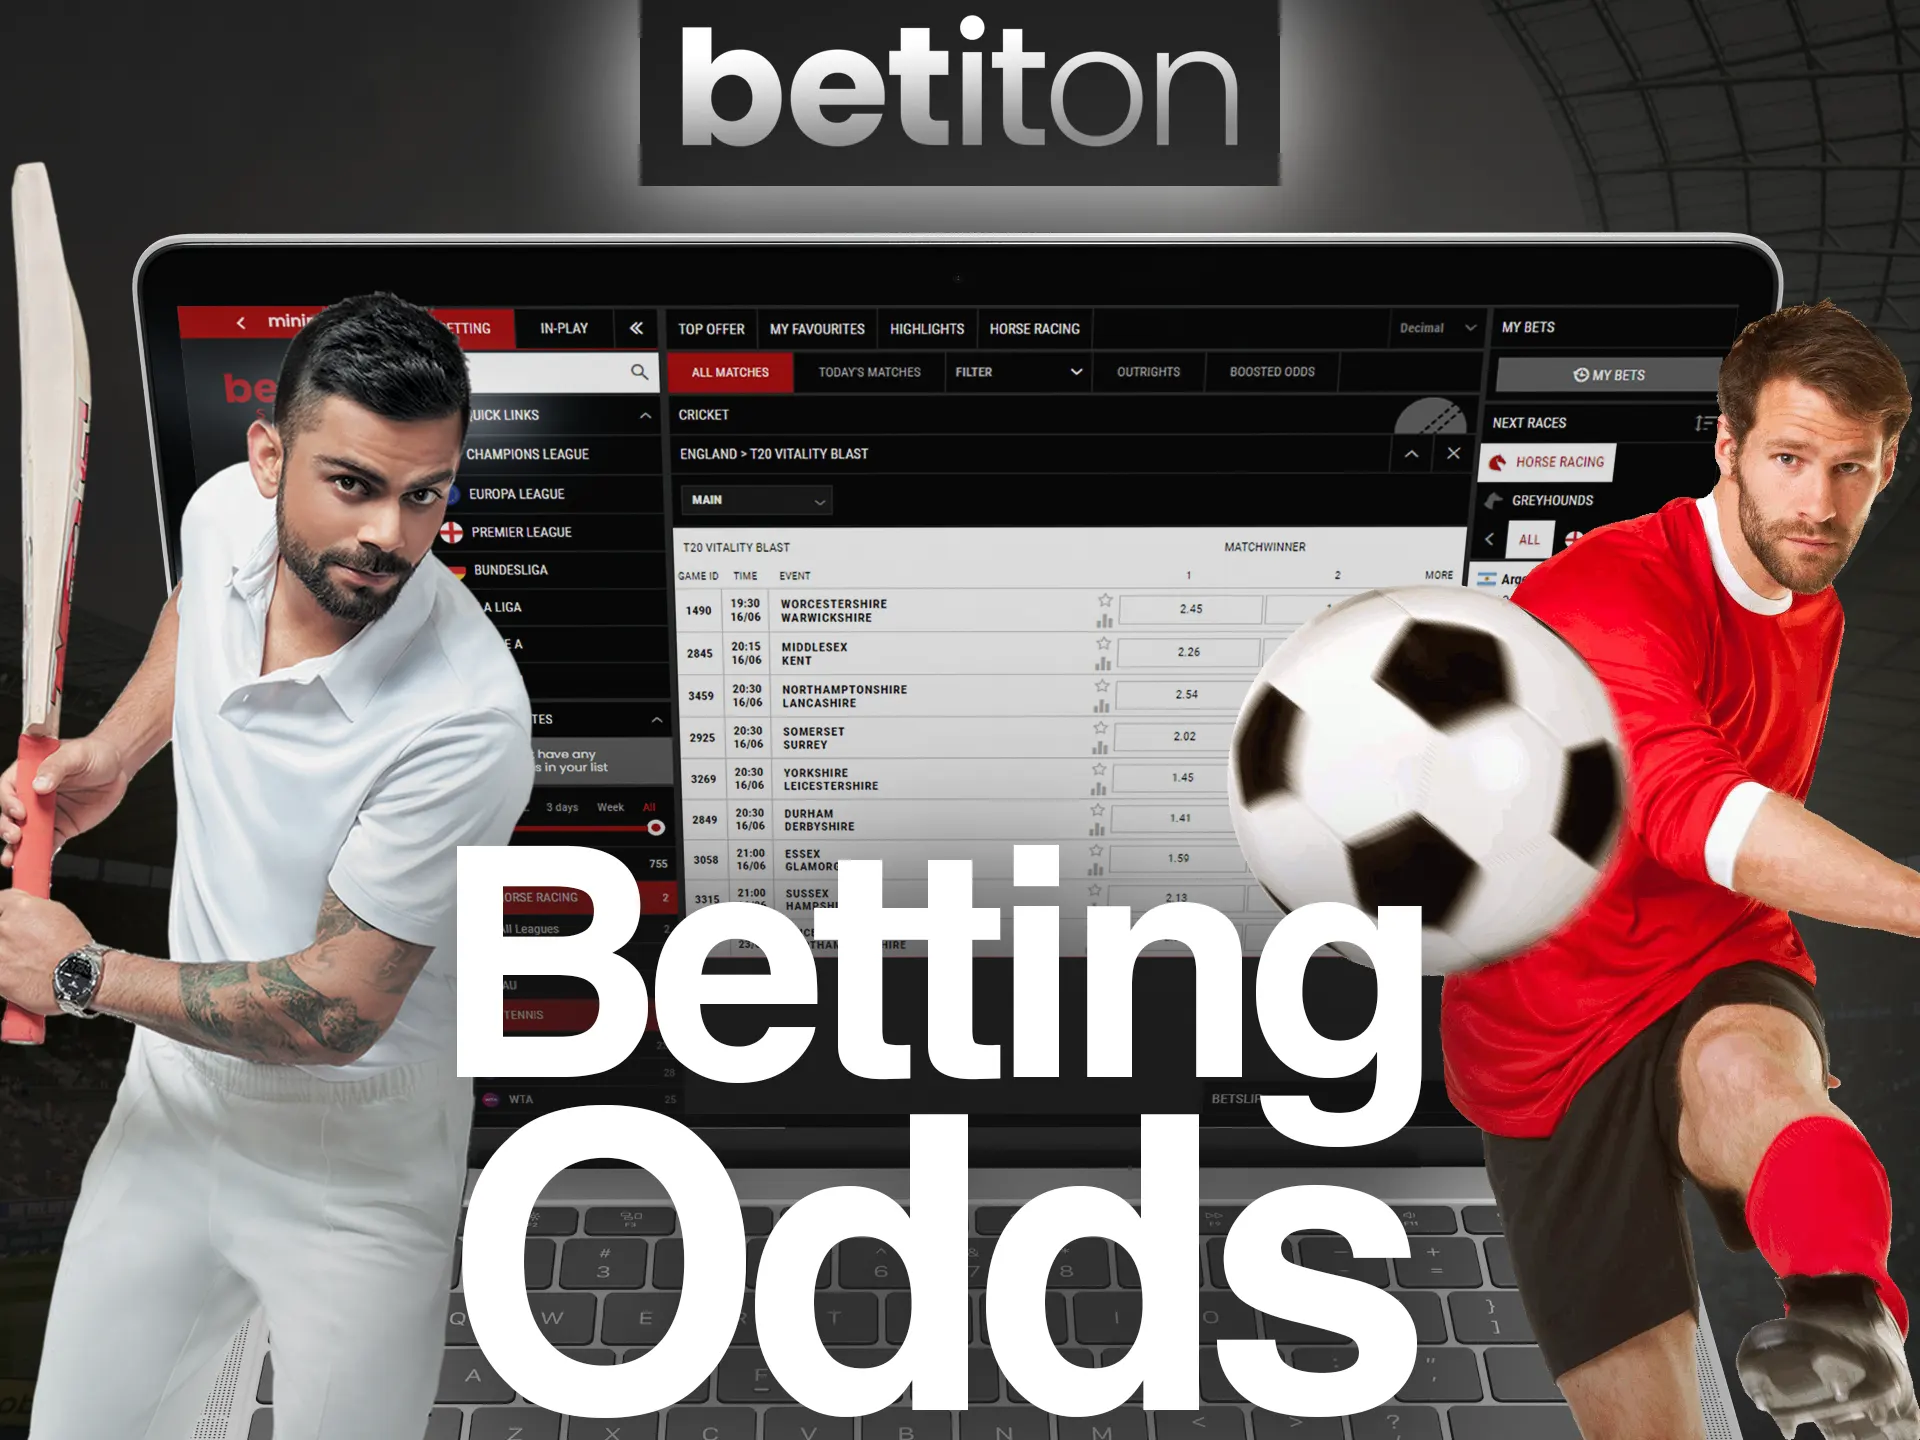 Calculate odds before making a new bet at the Betiton.